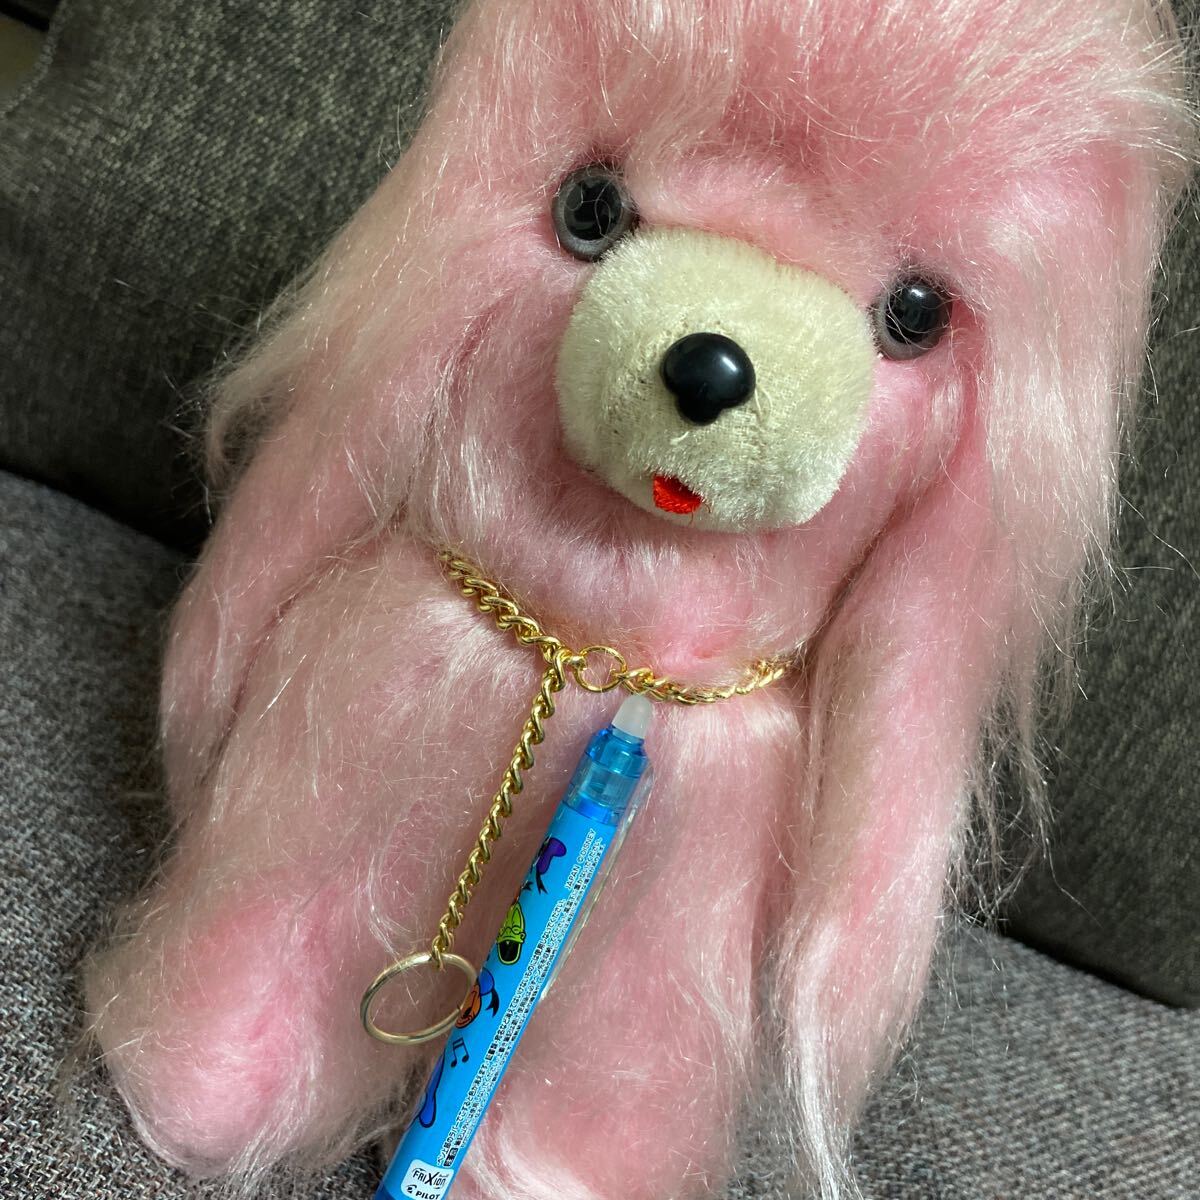  Showa Retro soft toy . repairs one Chan dog that time thing toy doll pink 